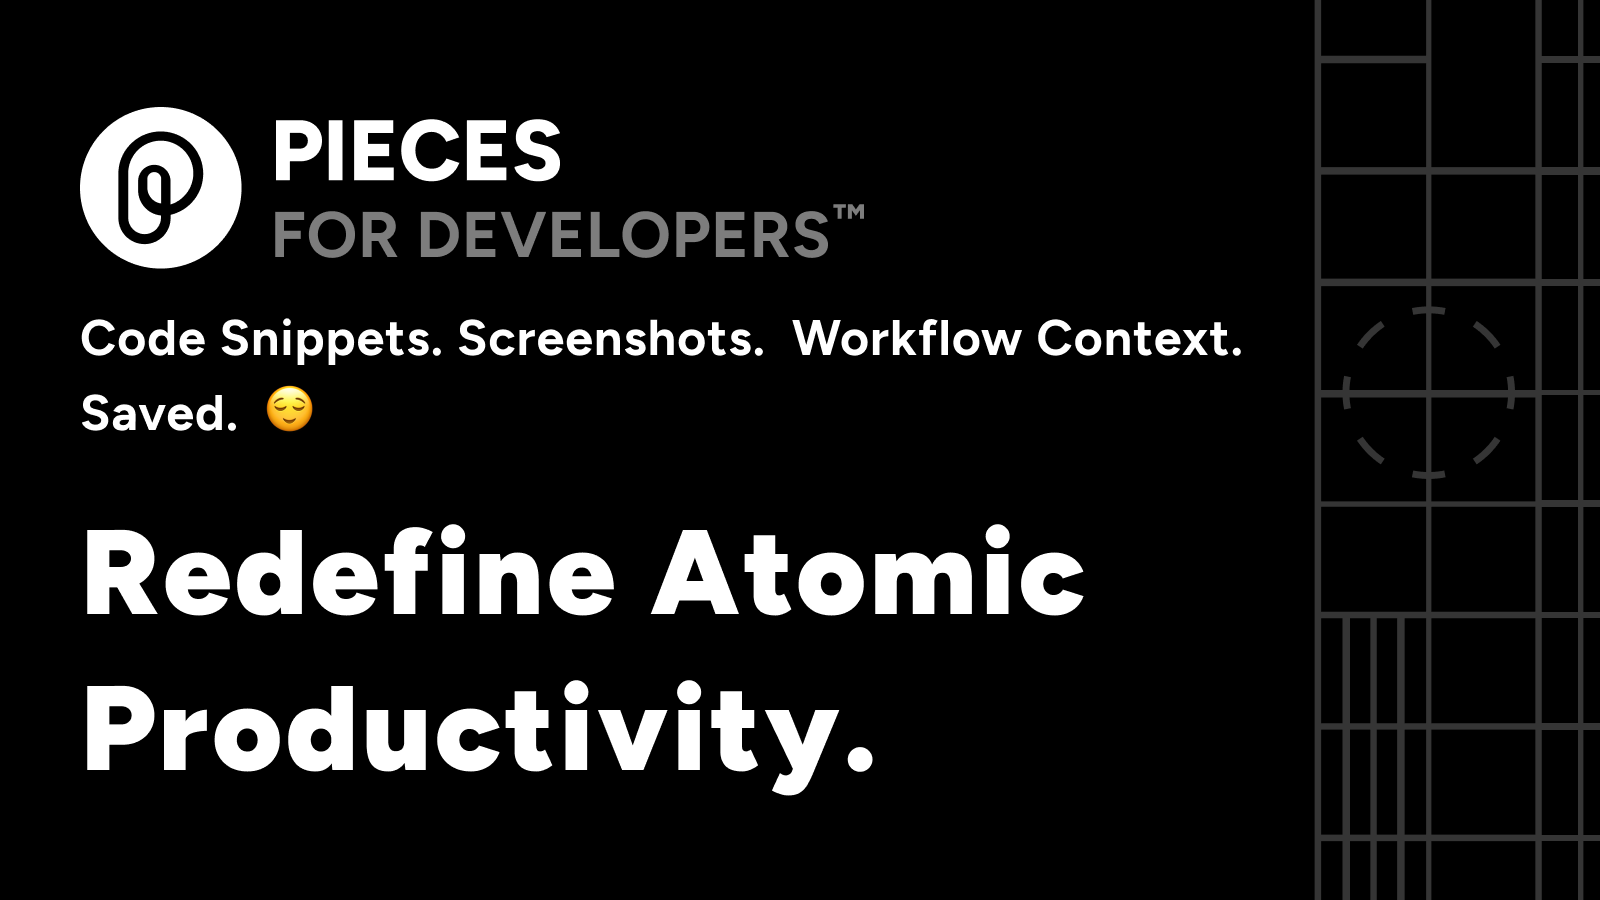 Pieces for Developers | AI-Enabled Developer Productivity